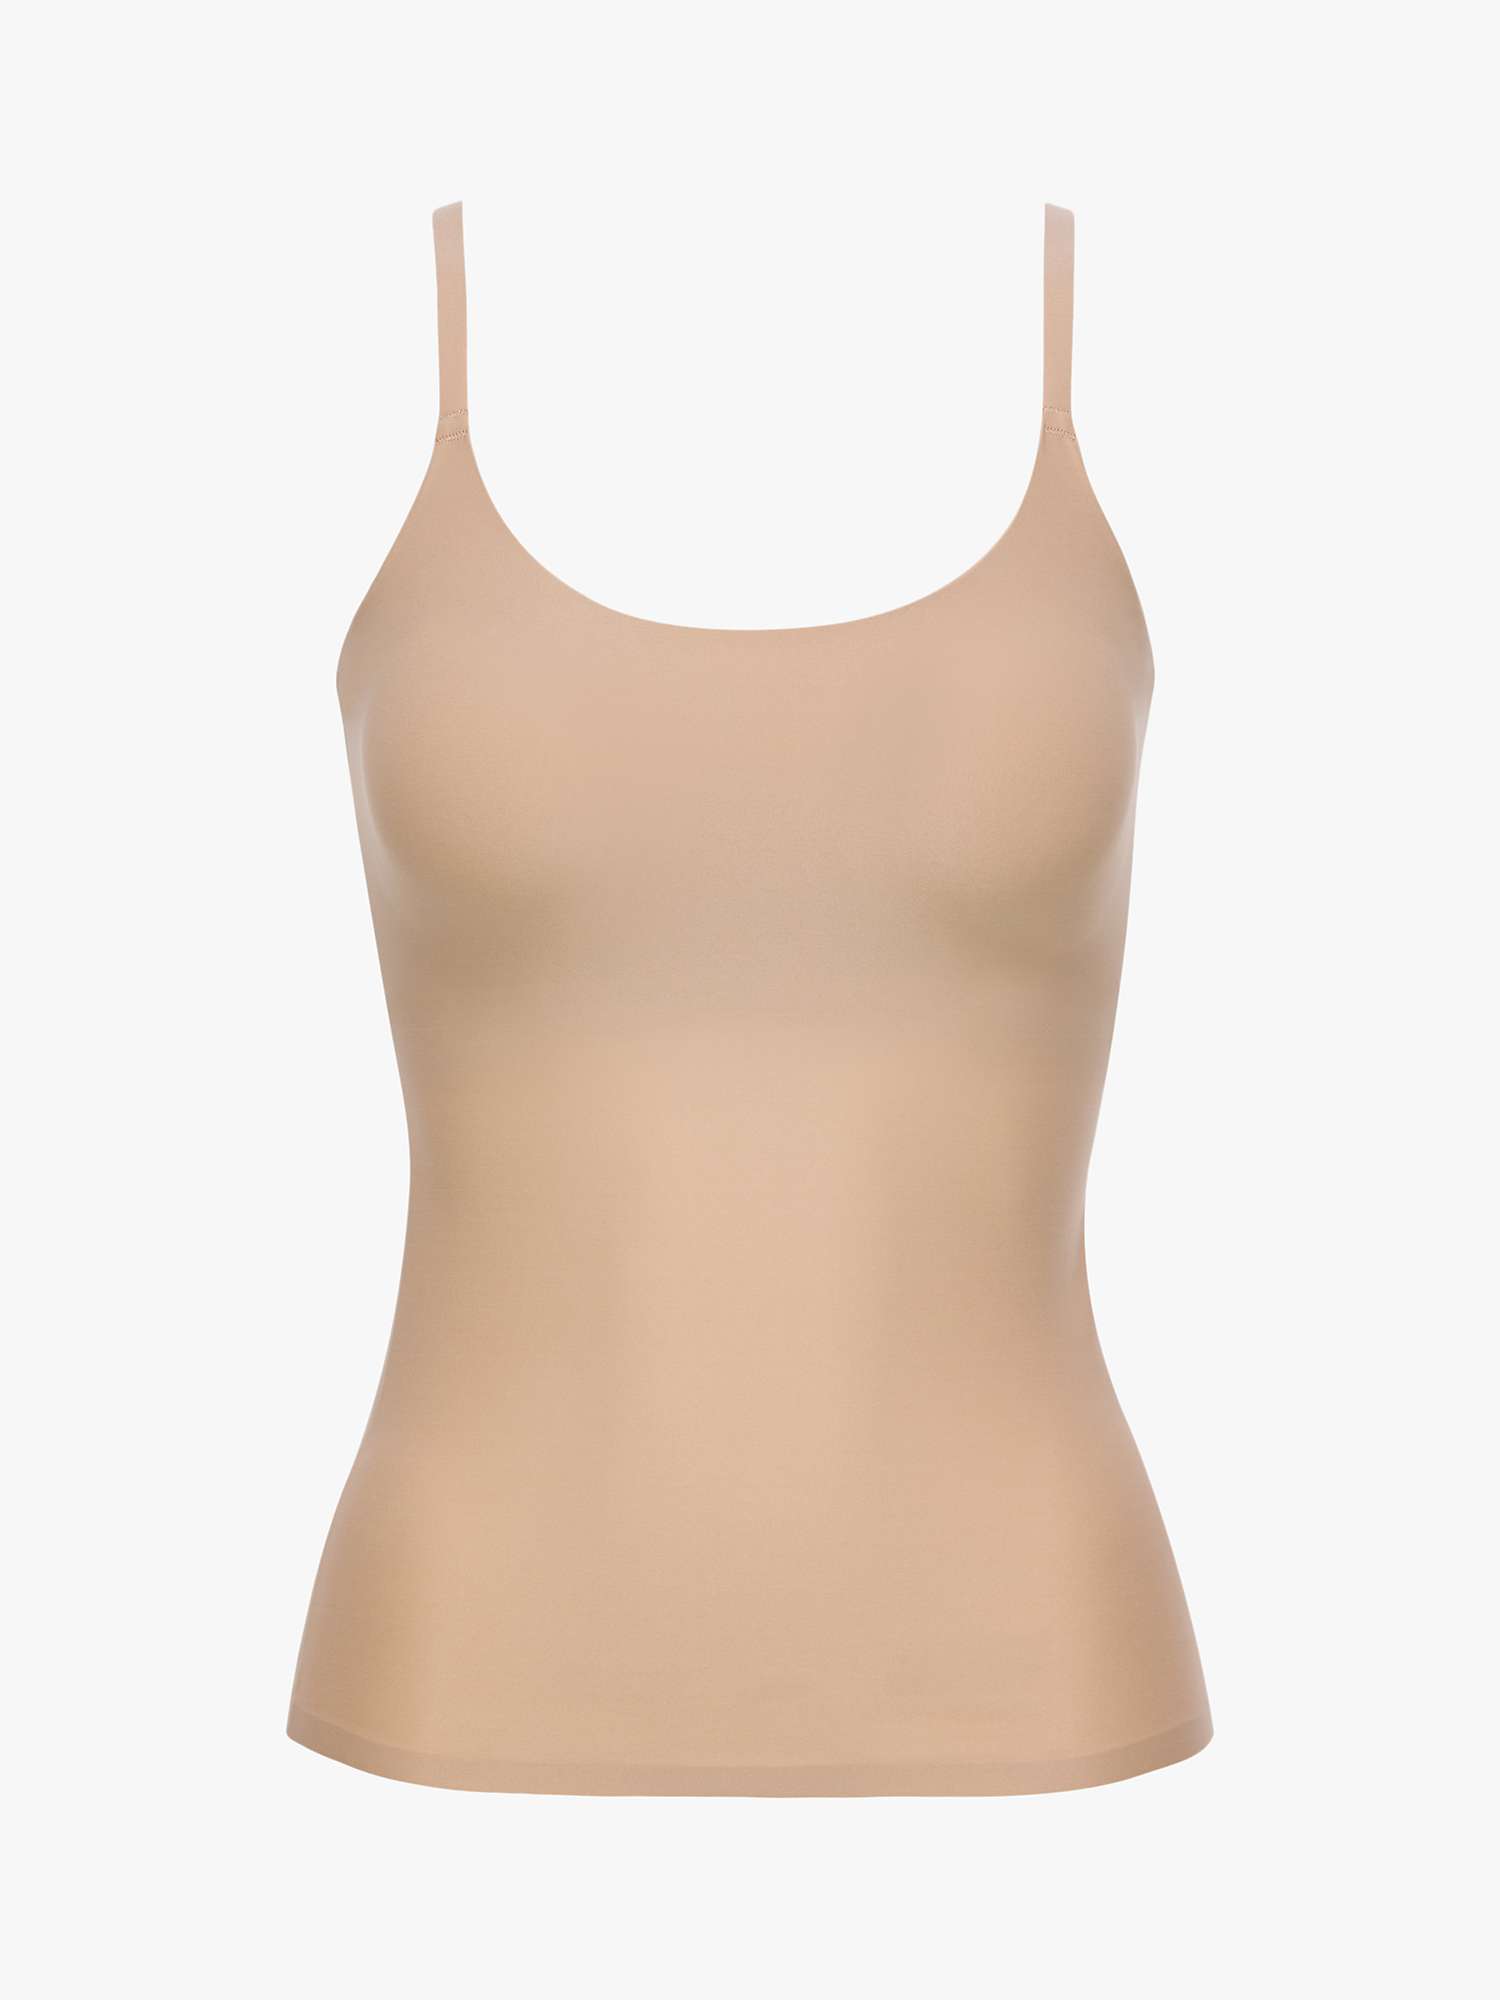 Buy Chantelle Soft Stretch Padded Camisole Online at johnlewis.com